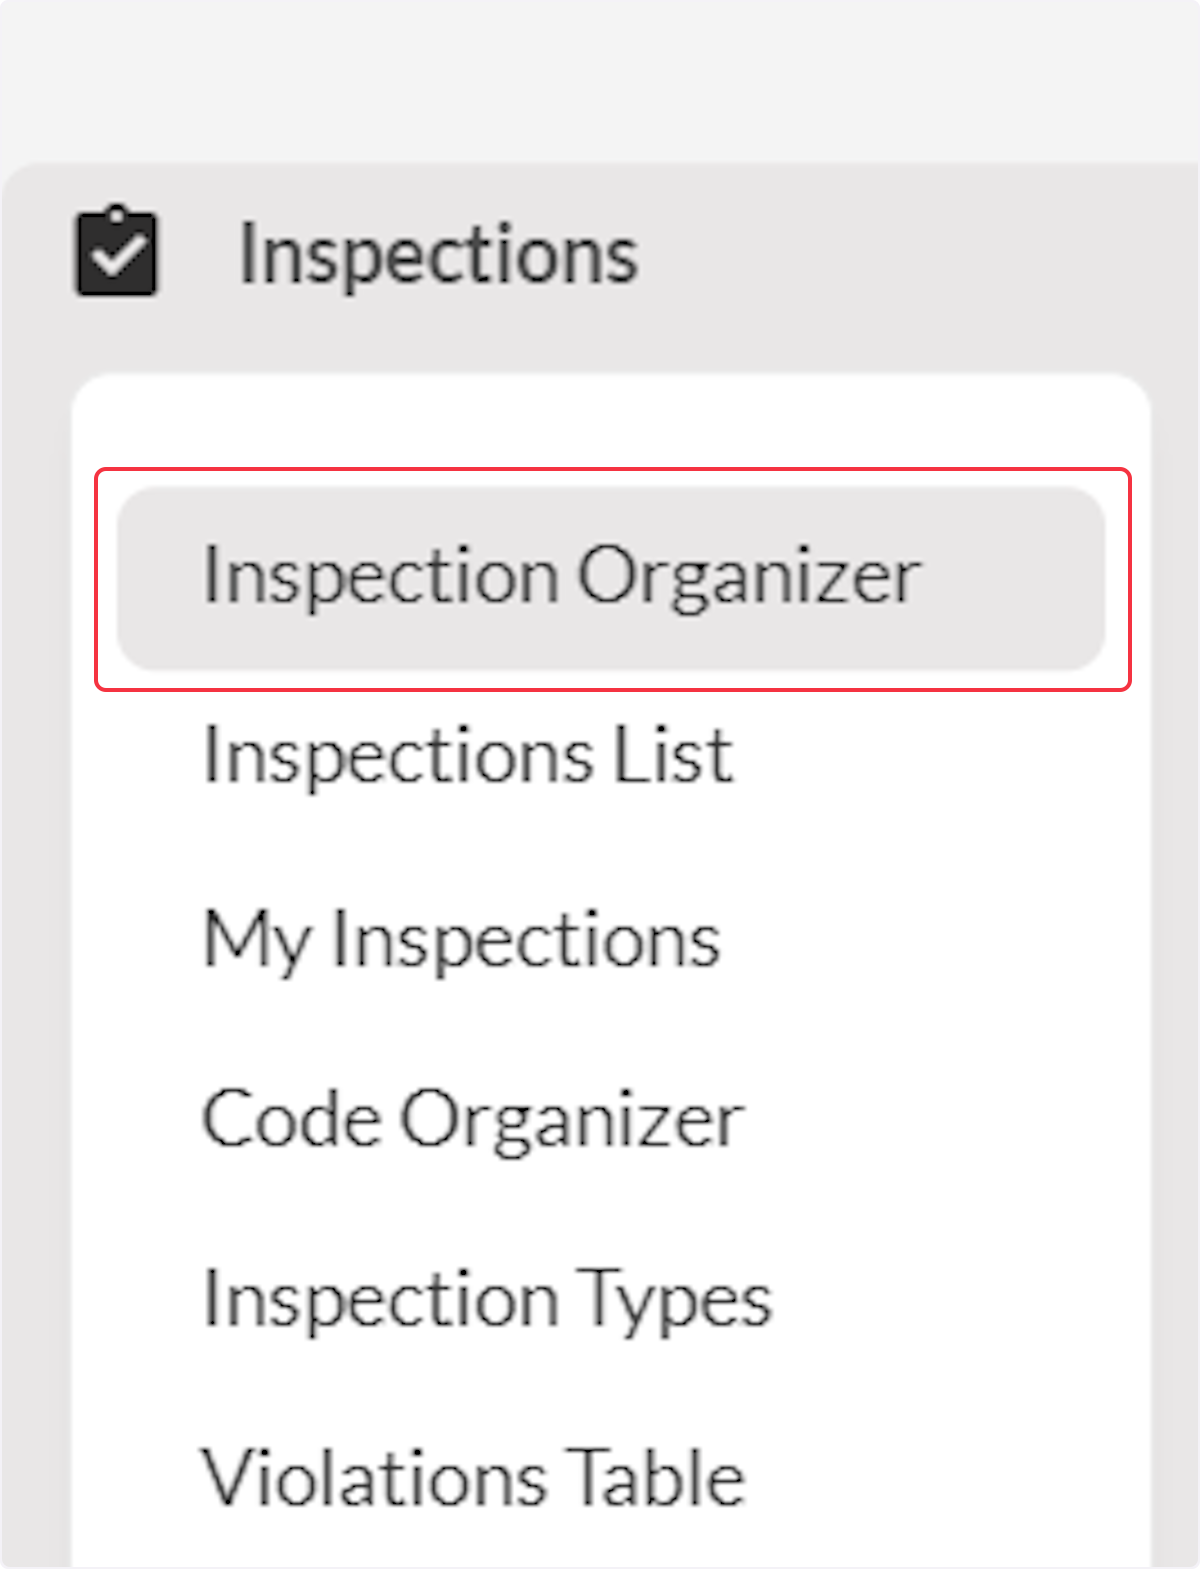 Click on Inspection Organizer.